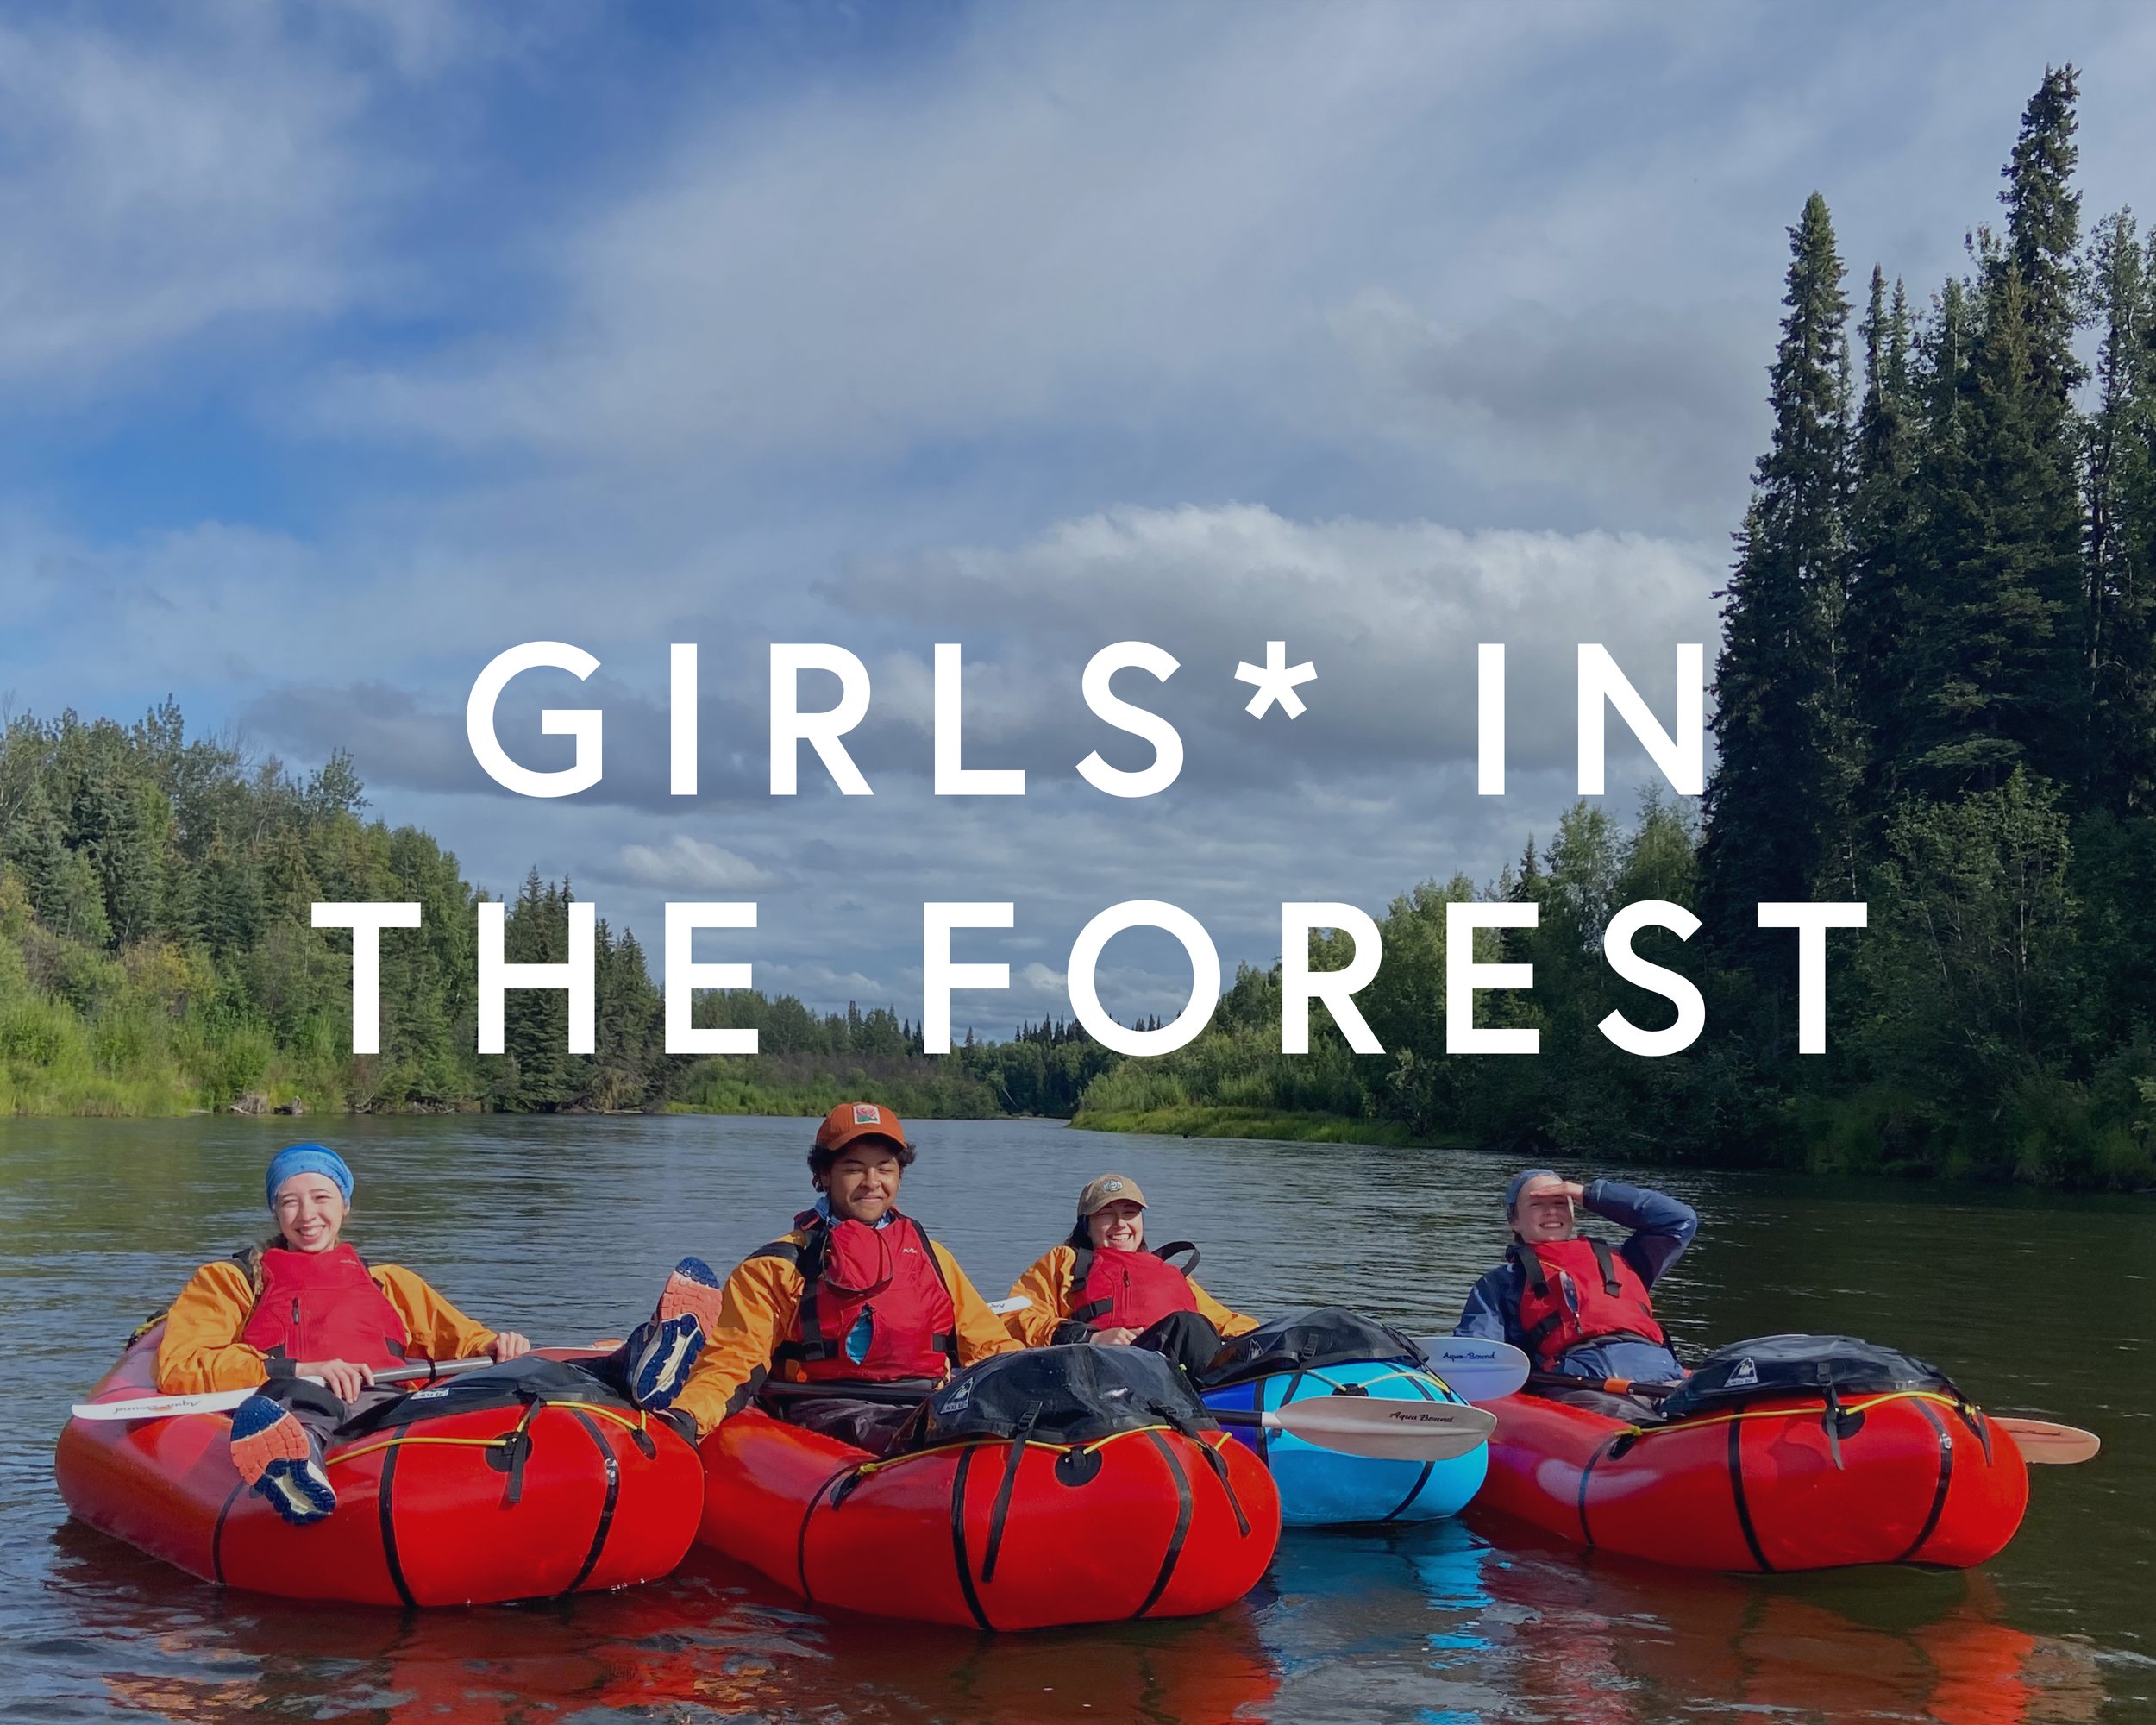 Image links to the Girls* in the Forest expedition page